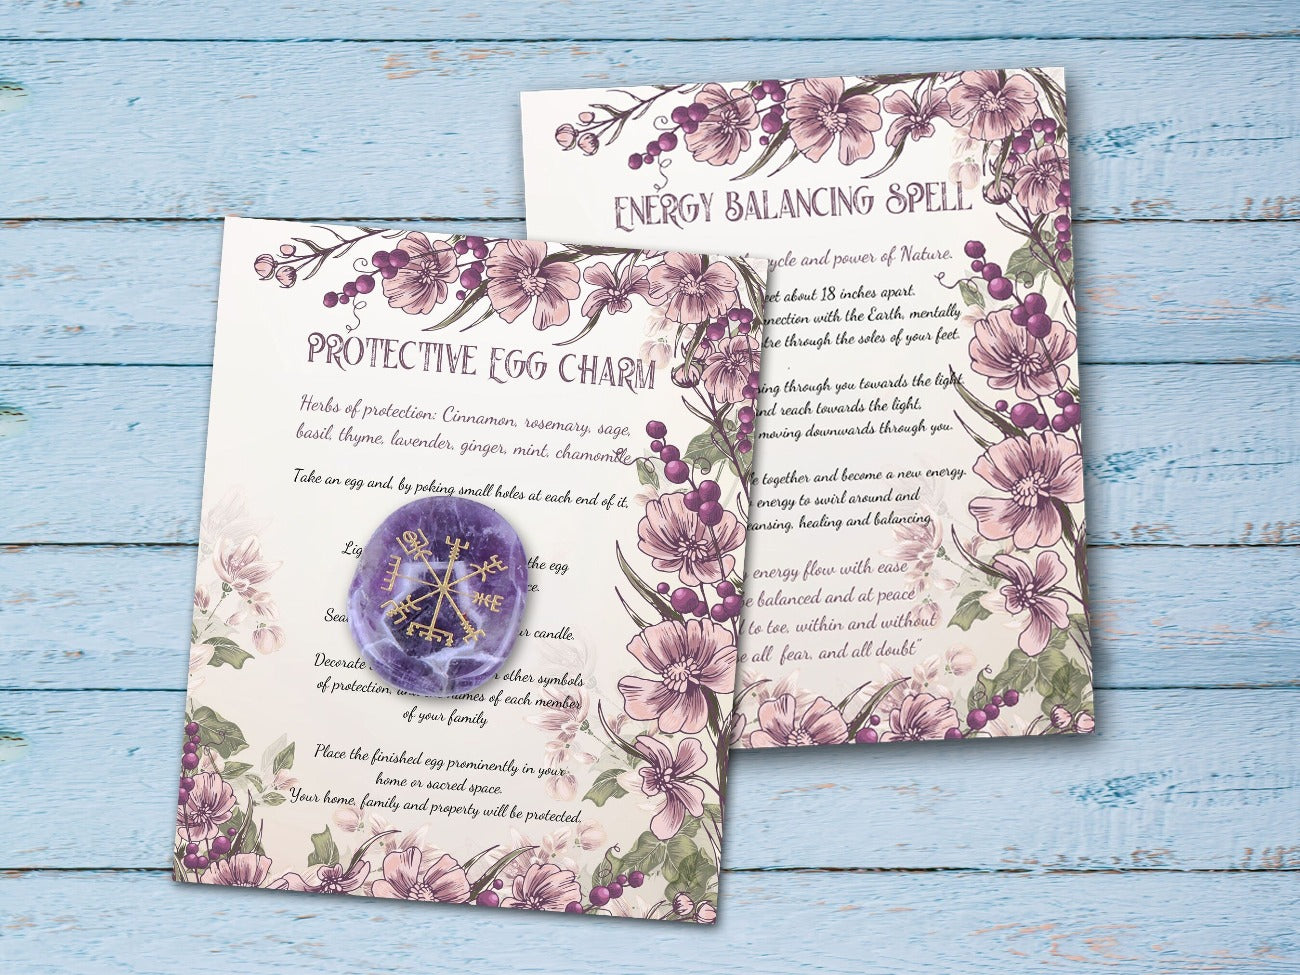 OSTARA SPELL CARDS, Protective Egg Charm and Energy Balancing Spell cards placed on a rustic blue wood background - Morgana Magick Spell